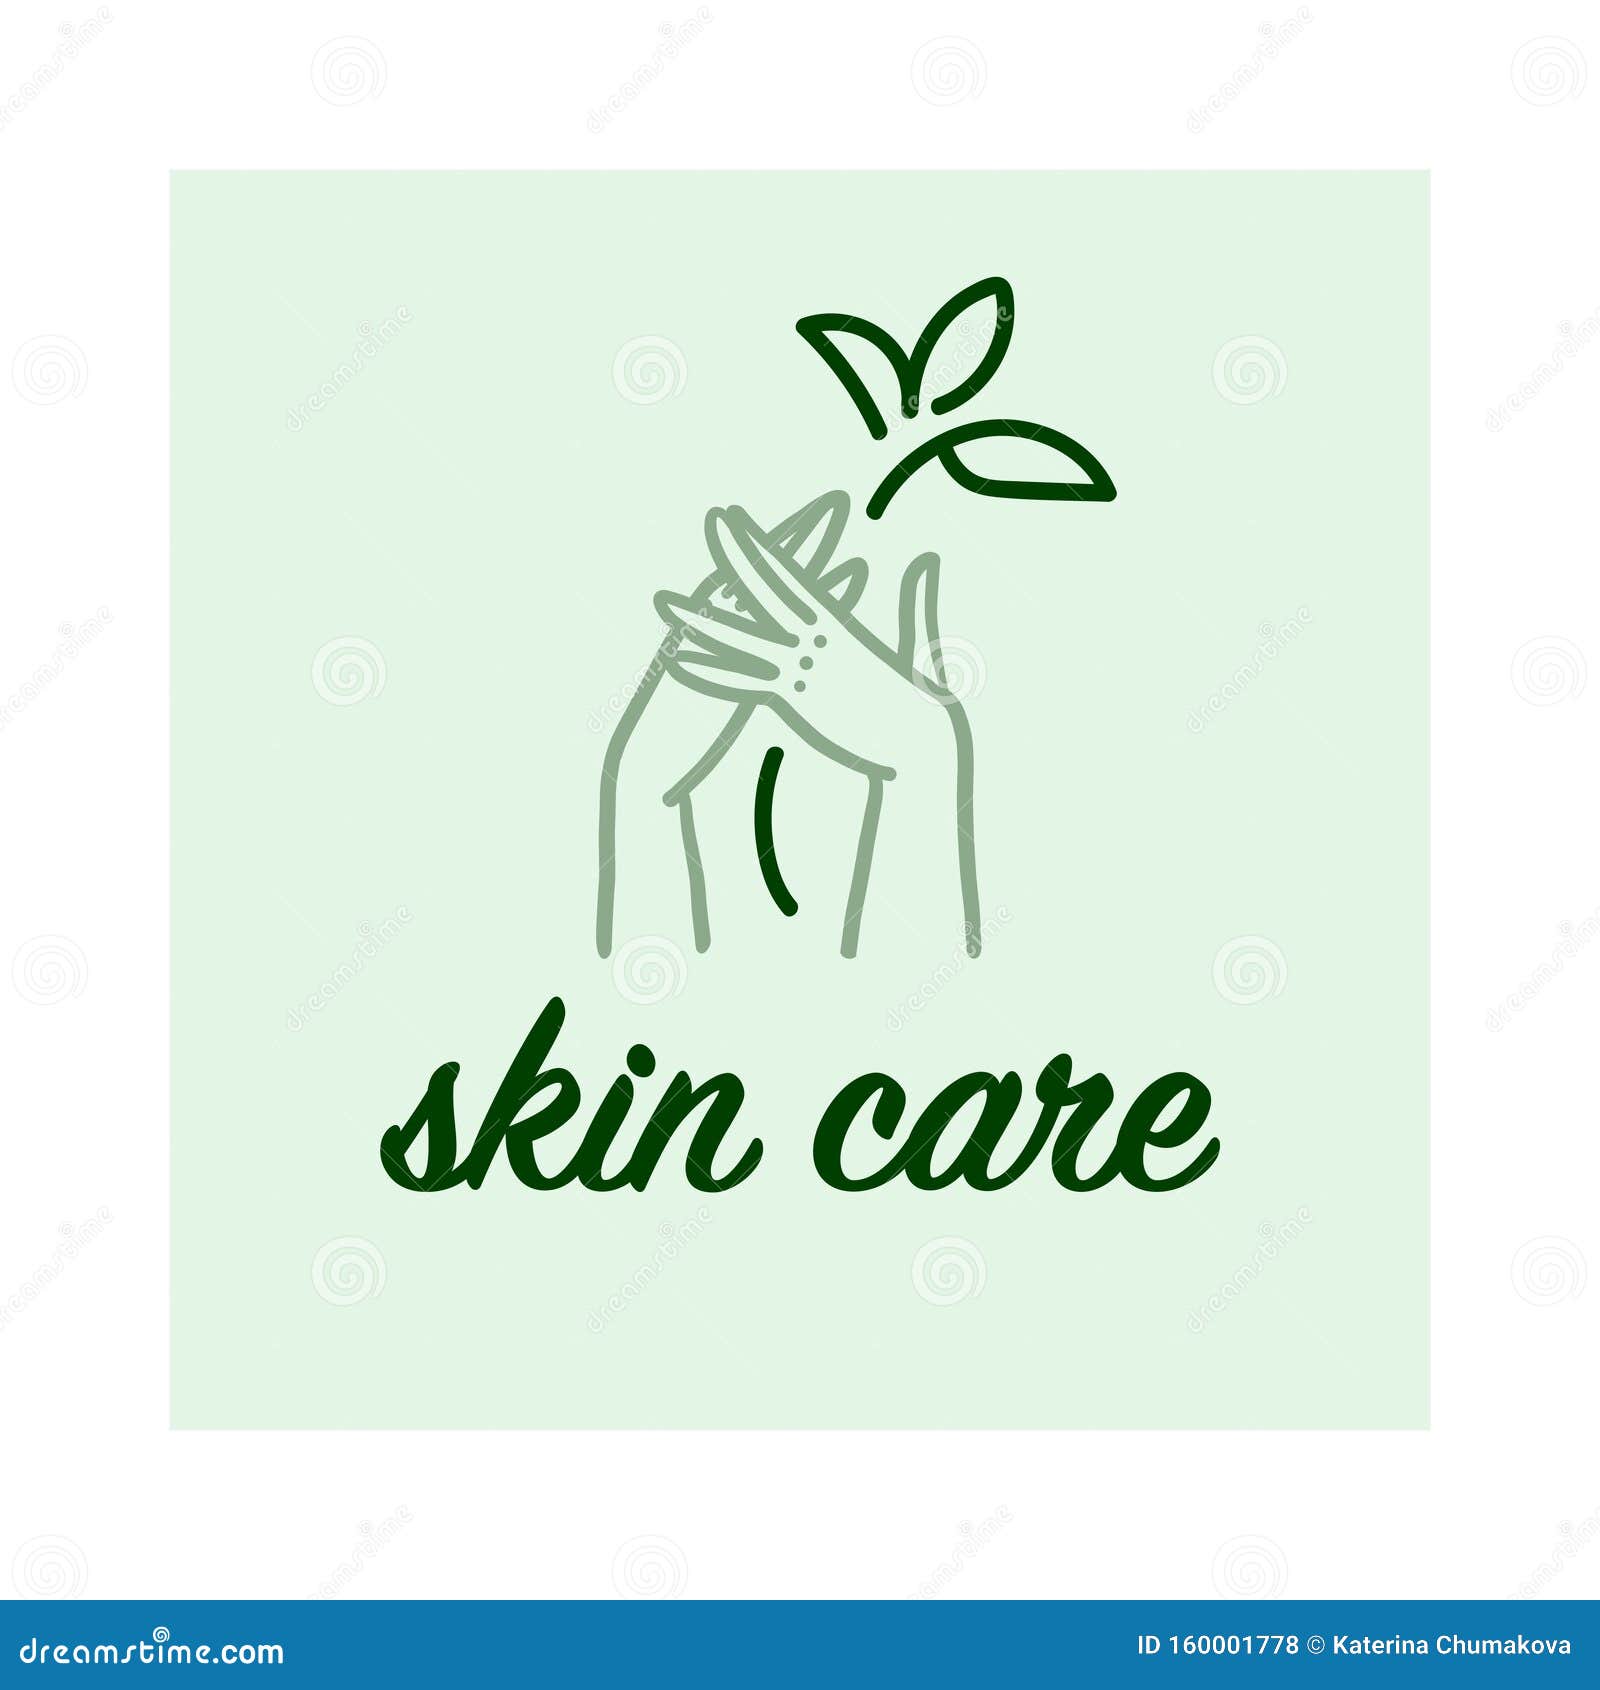 Skin Care Logo Vector Images (over 24,000)